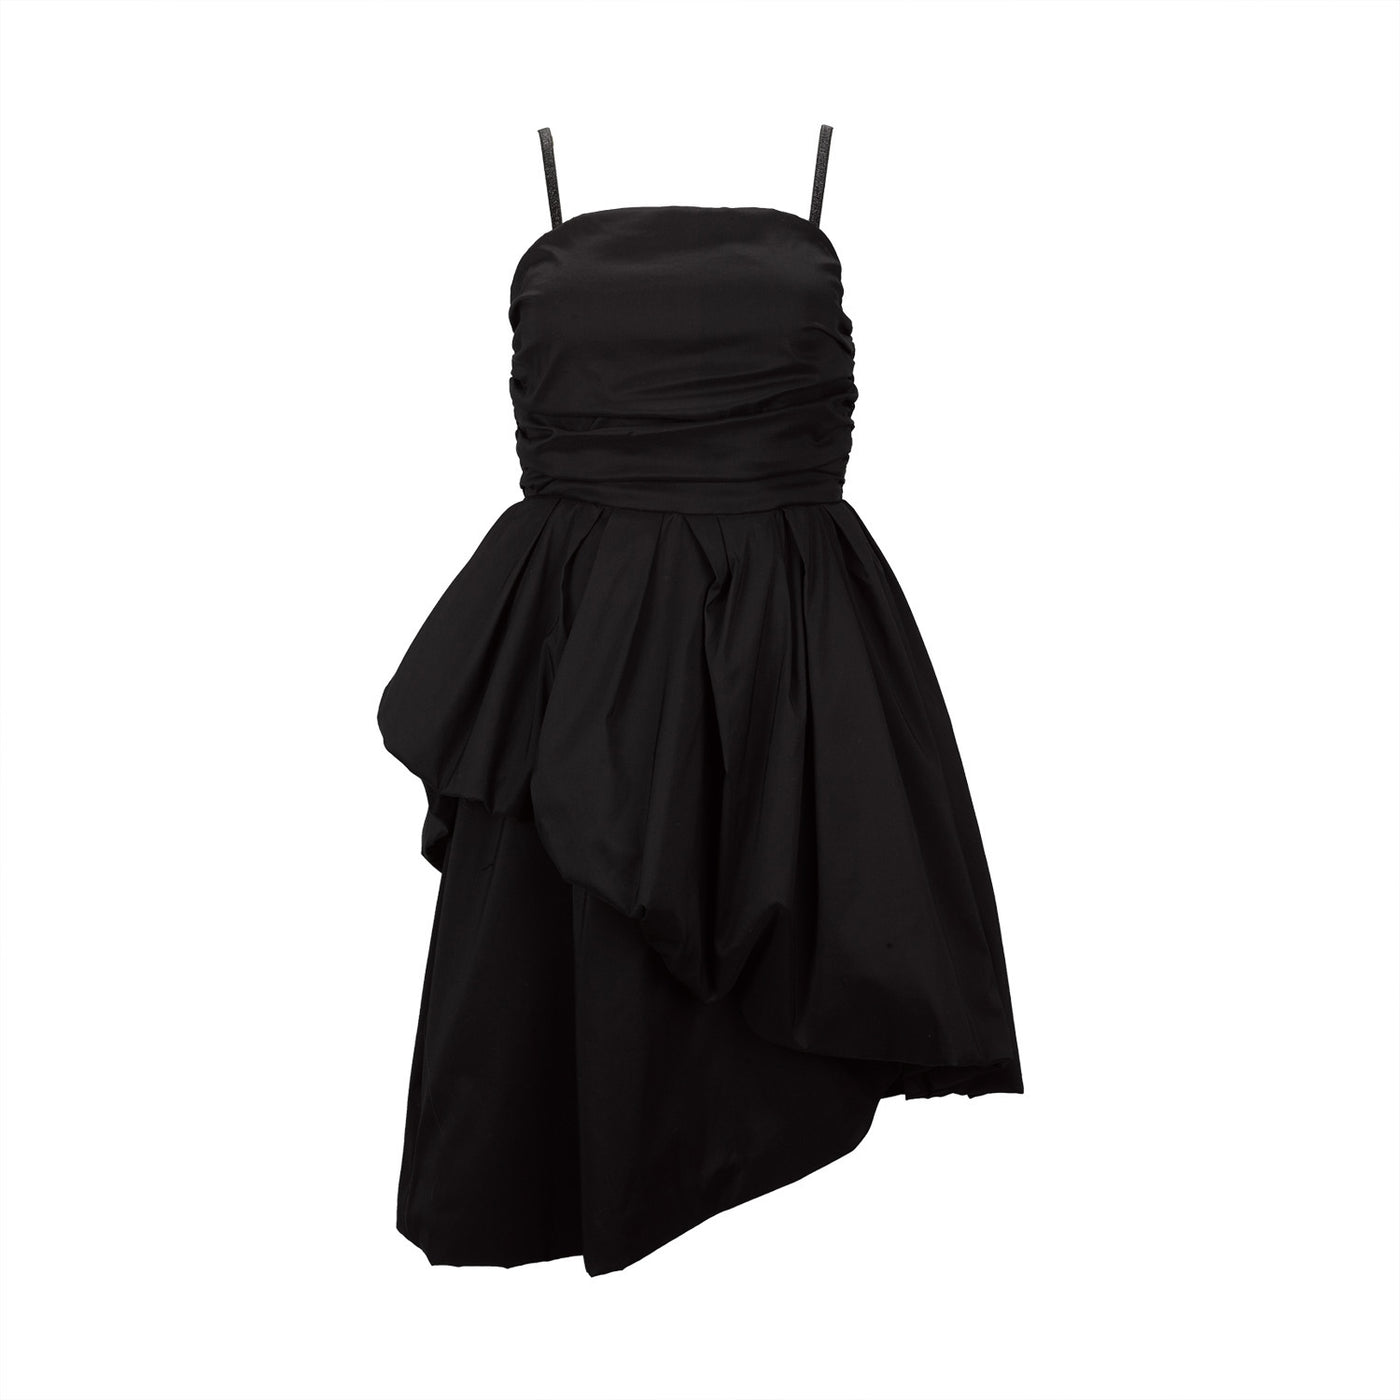 Black Deconstructed Dress with Straps